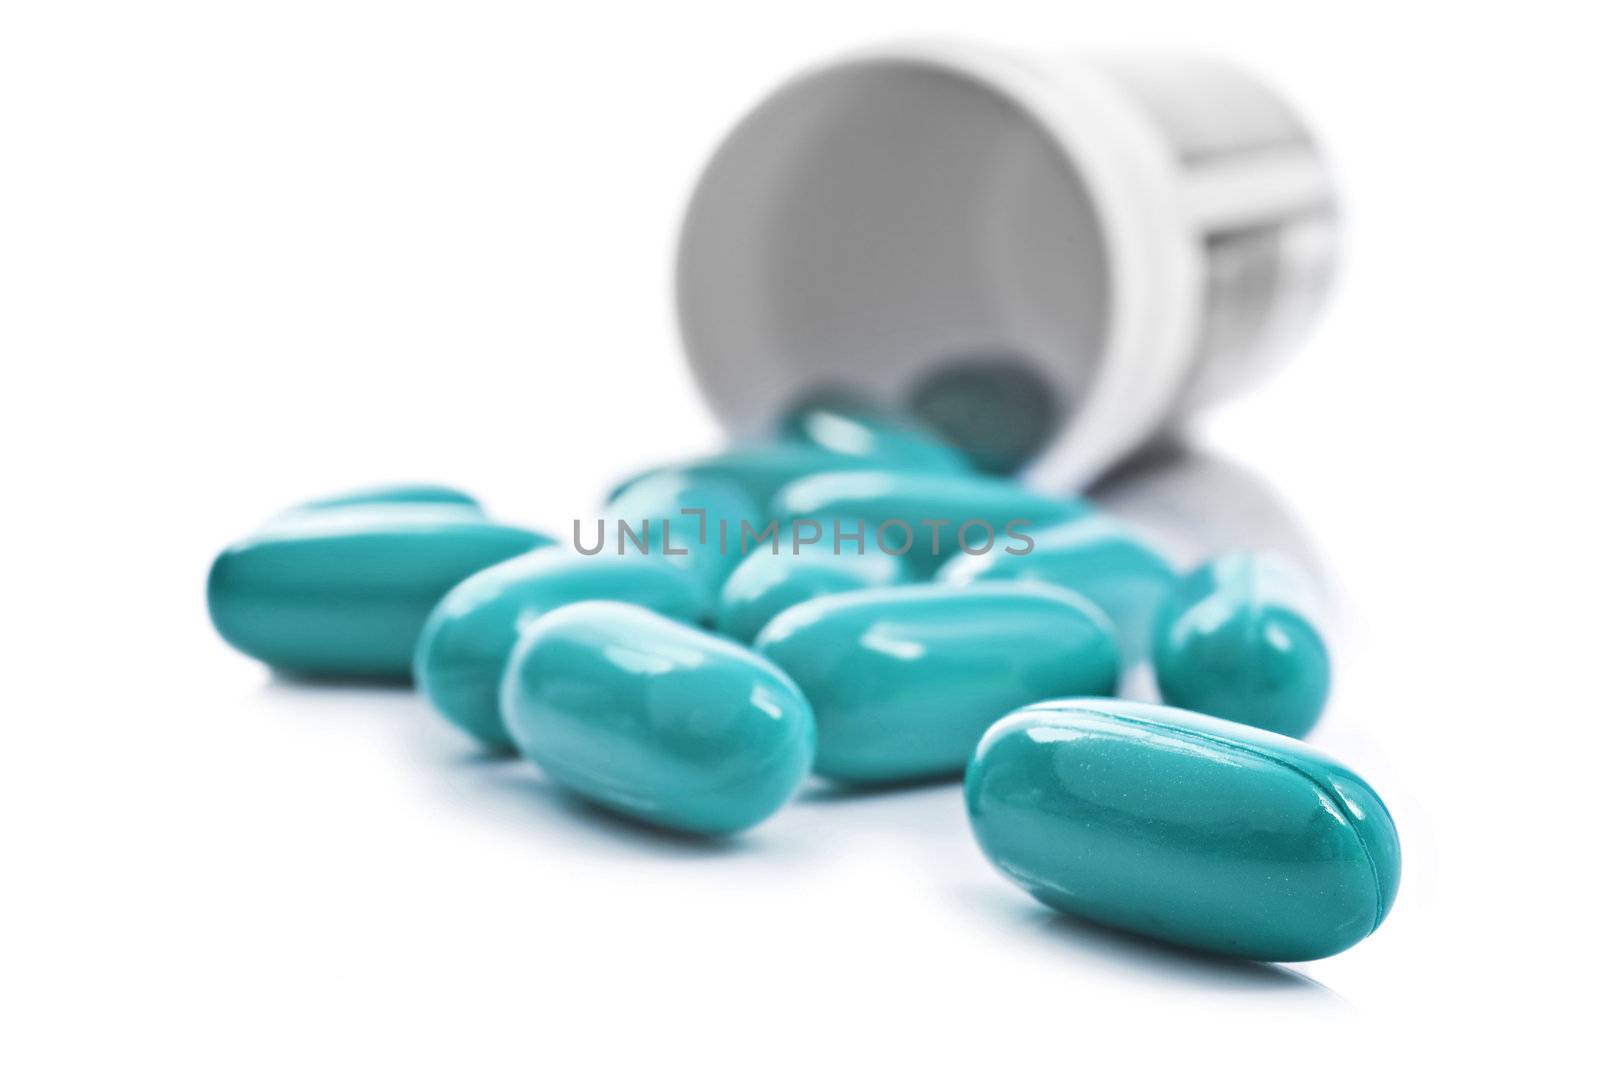 Blue pills an pill bottle on white background by tish1